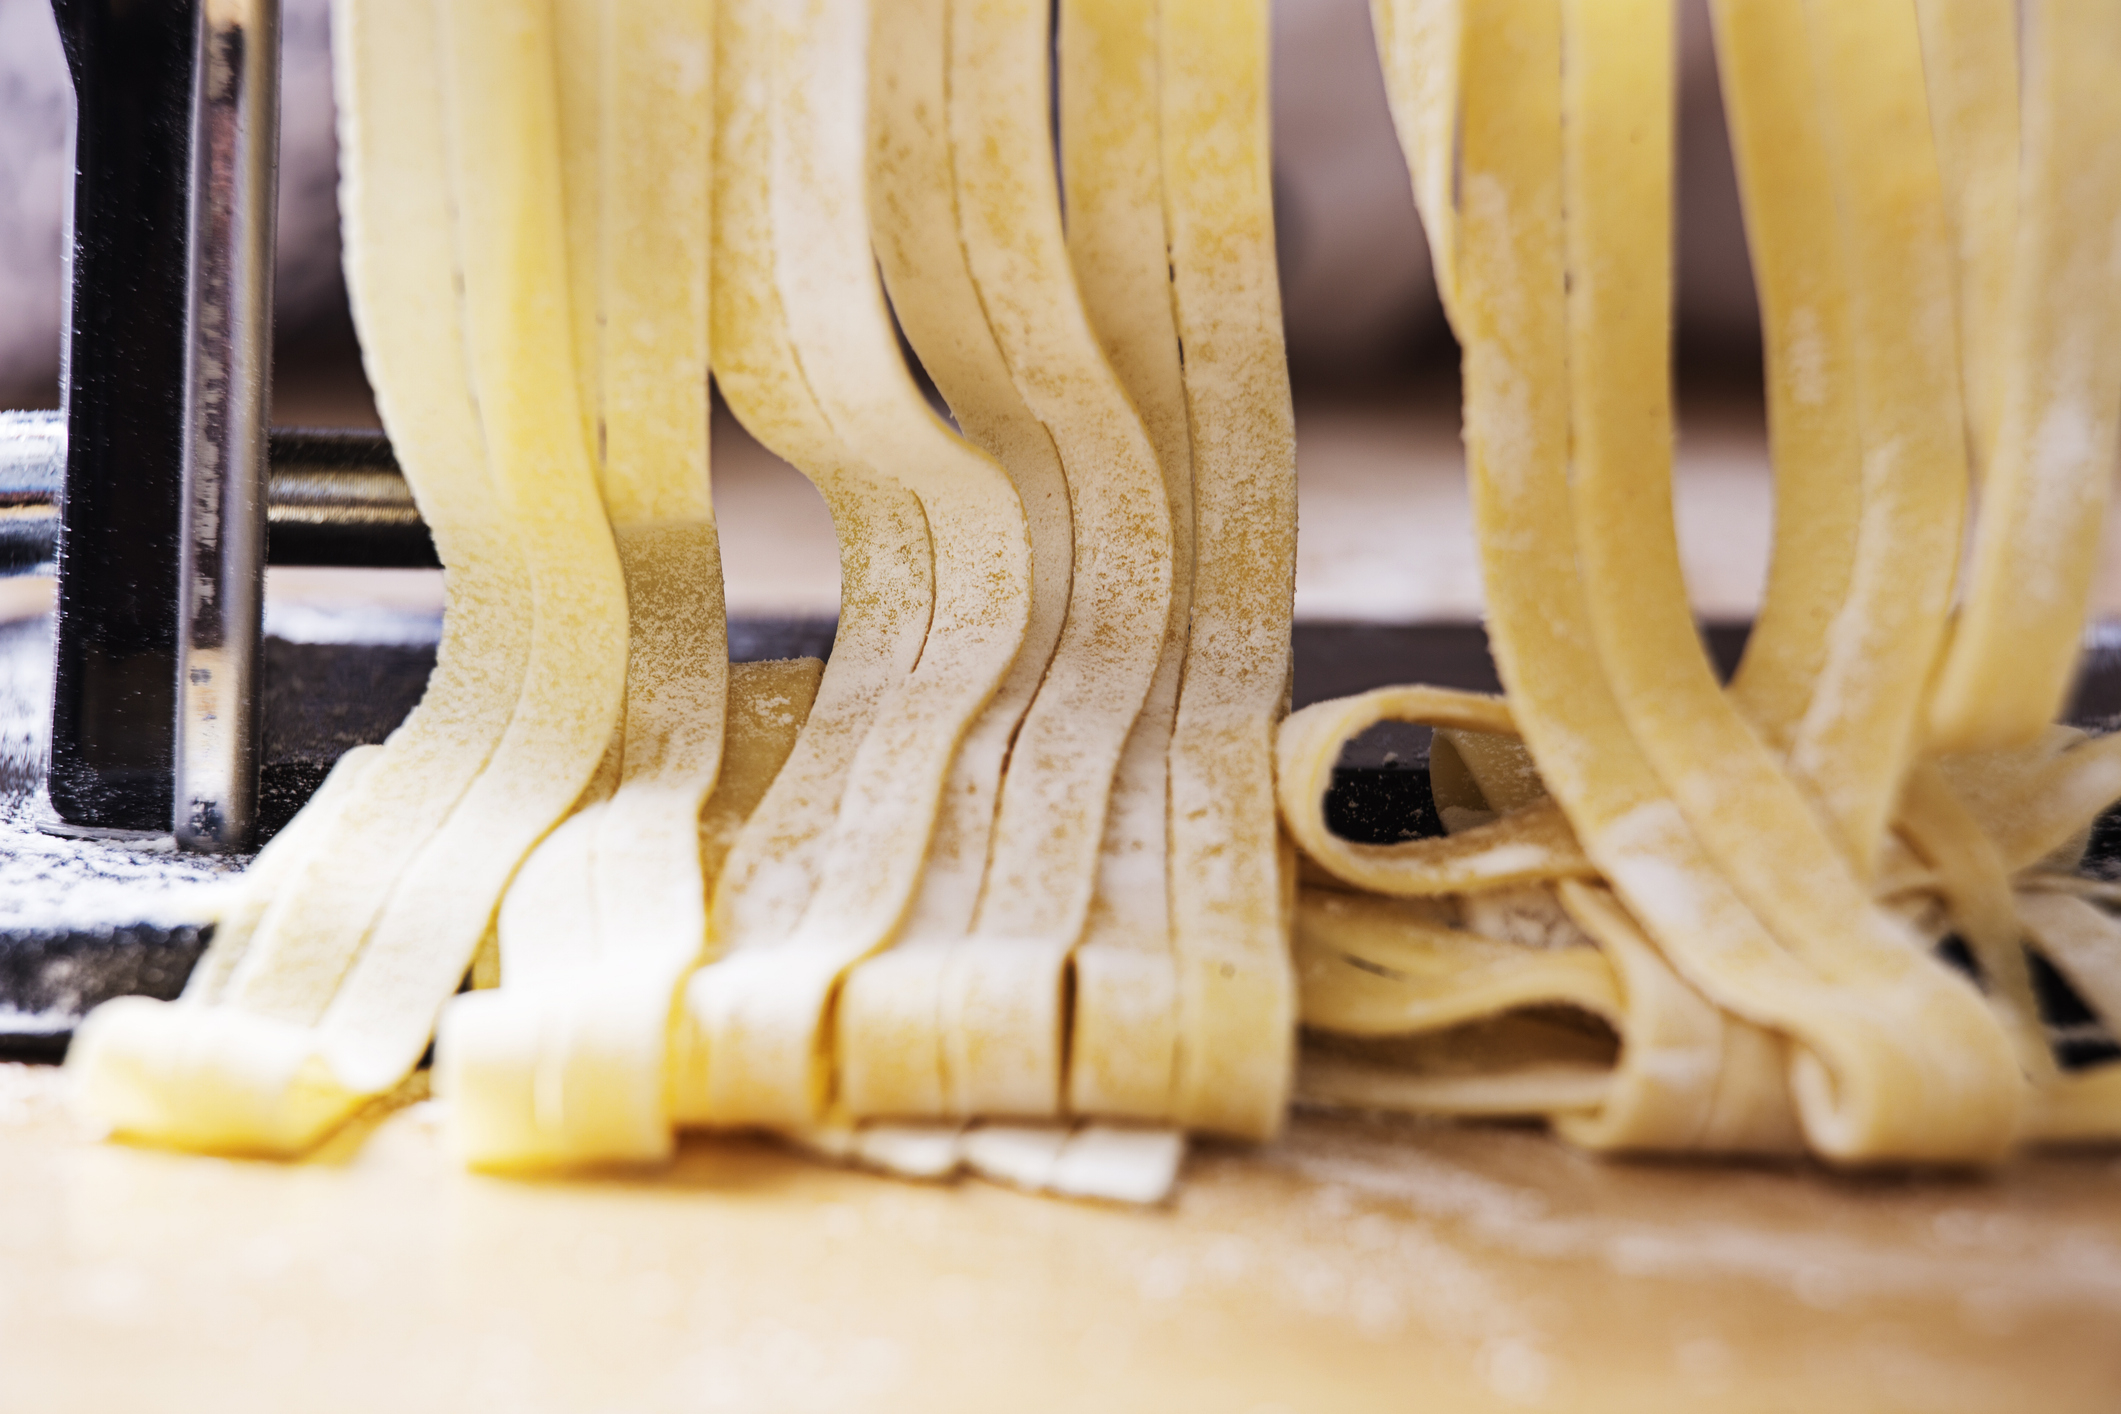 Fresh pasta dough being cut into noodles by a pasta machine